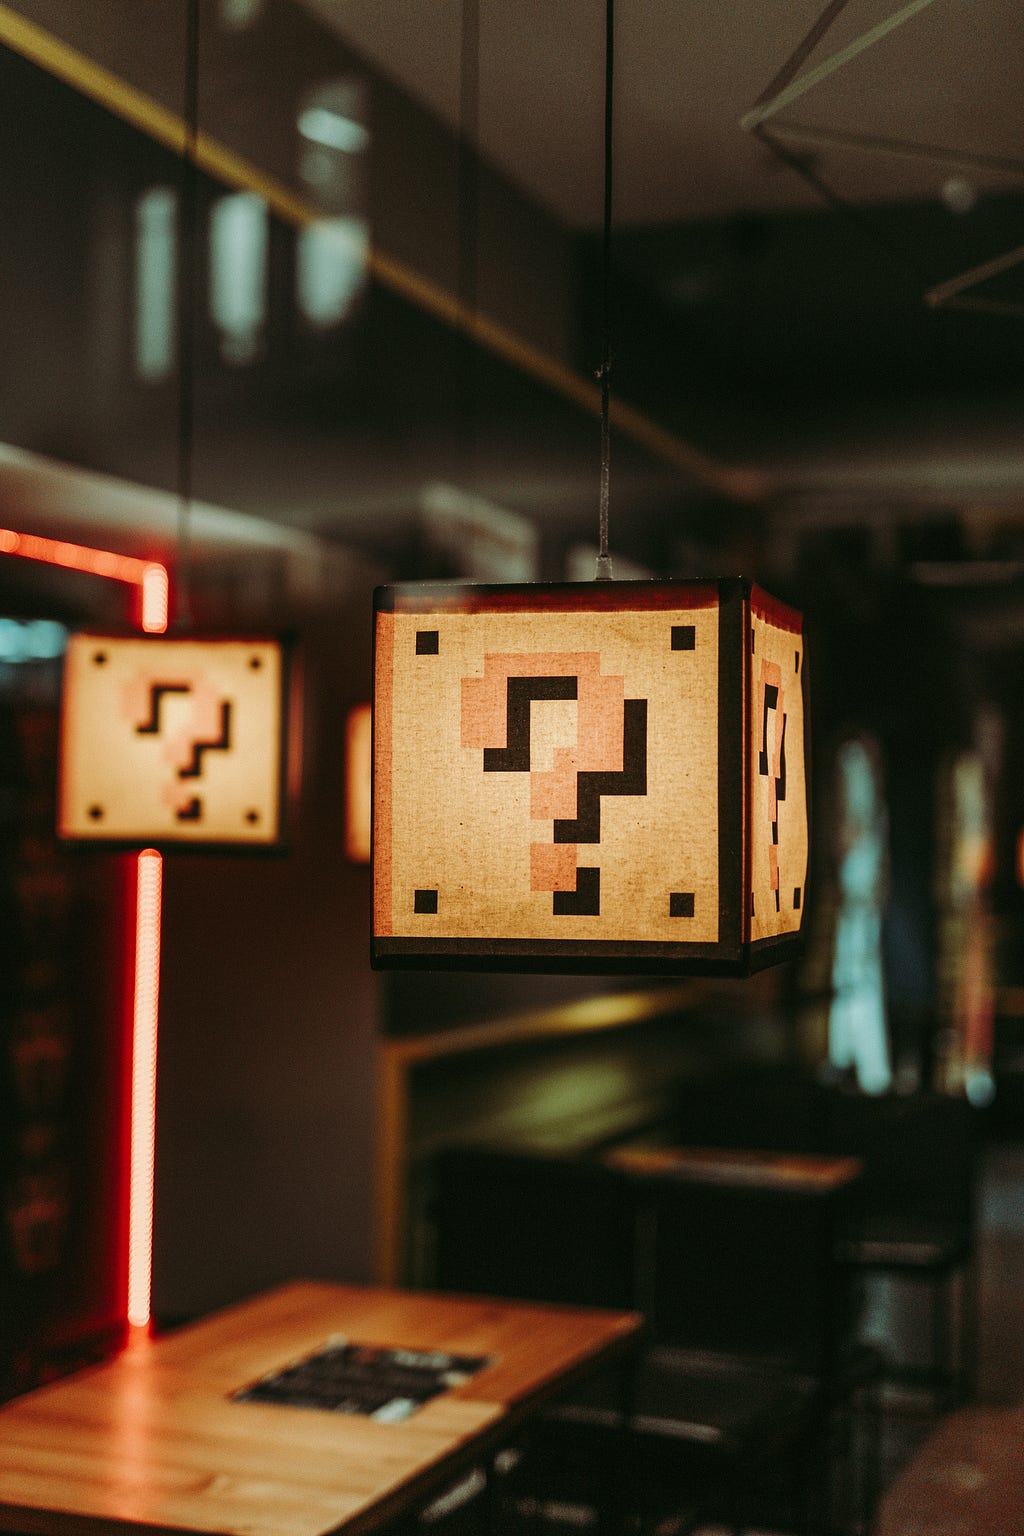 A wooden table topped with illuminated light fixtures. The fixtures are overlayed with question marks in the style of Super Mario Brothers.